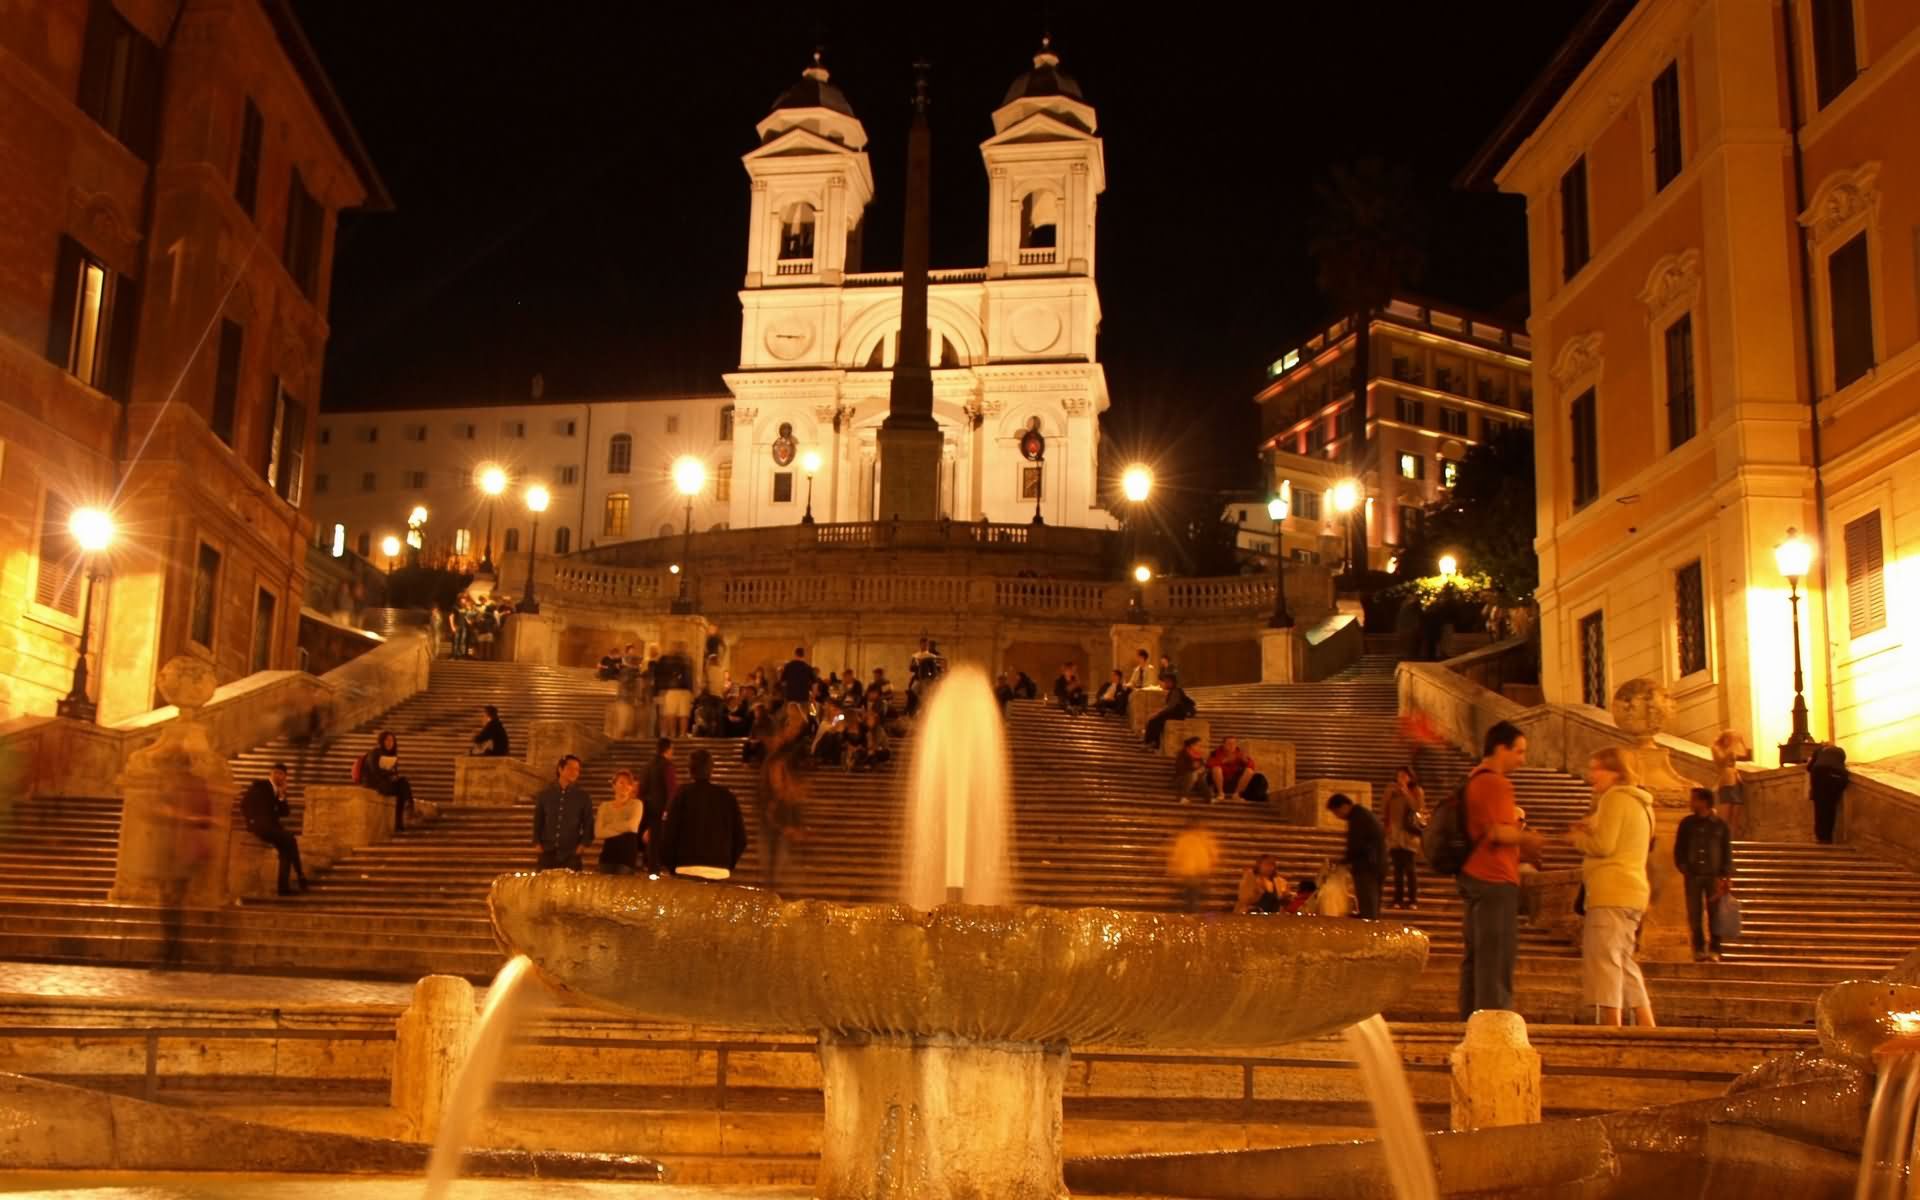 people enjoying the night view in front of Spanish steps